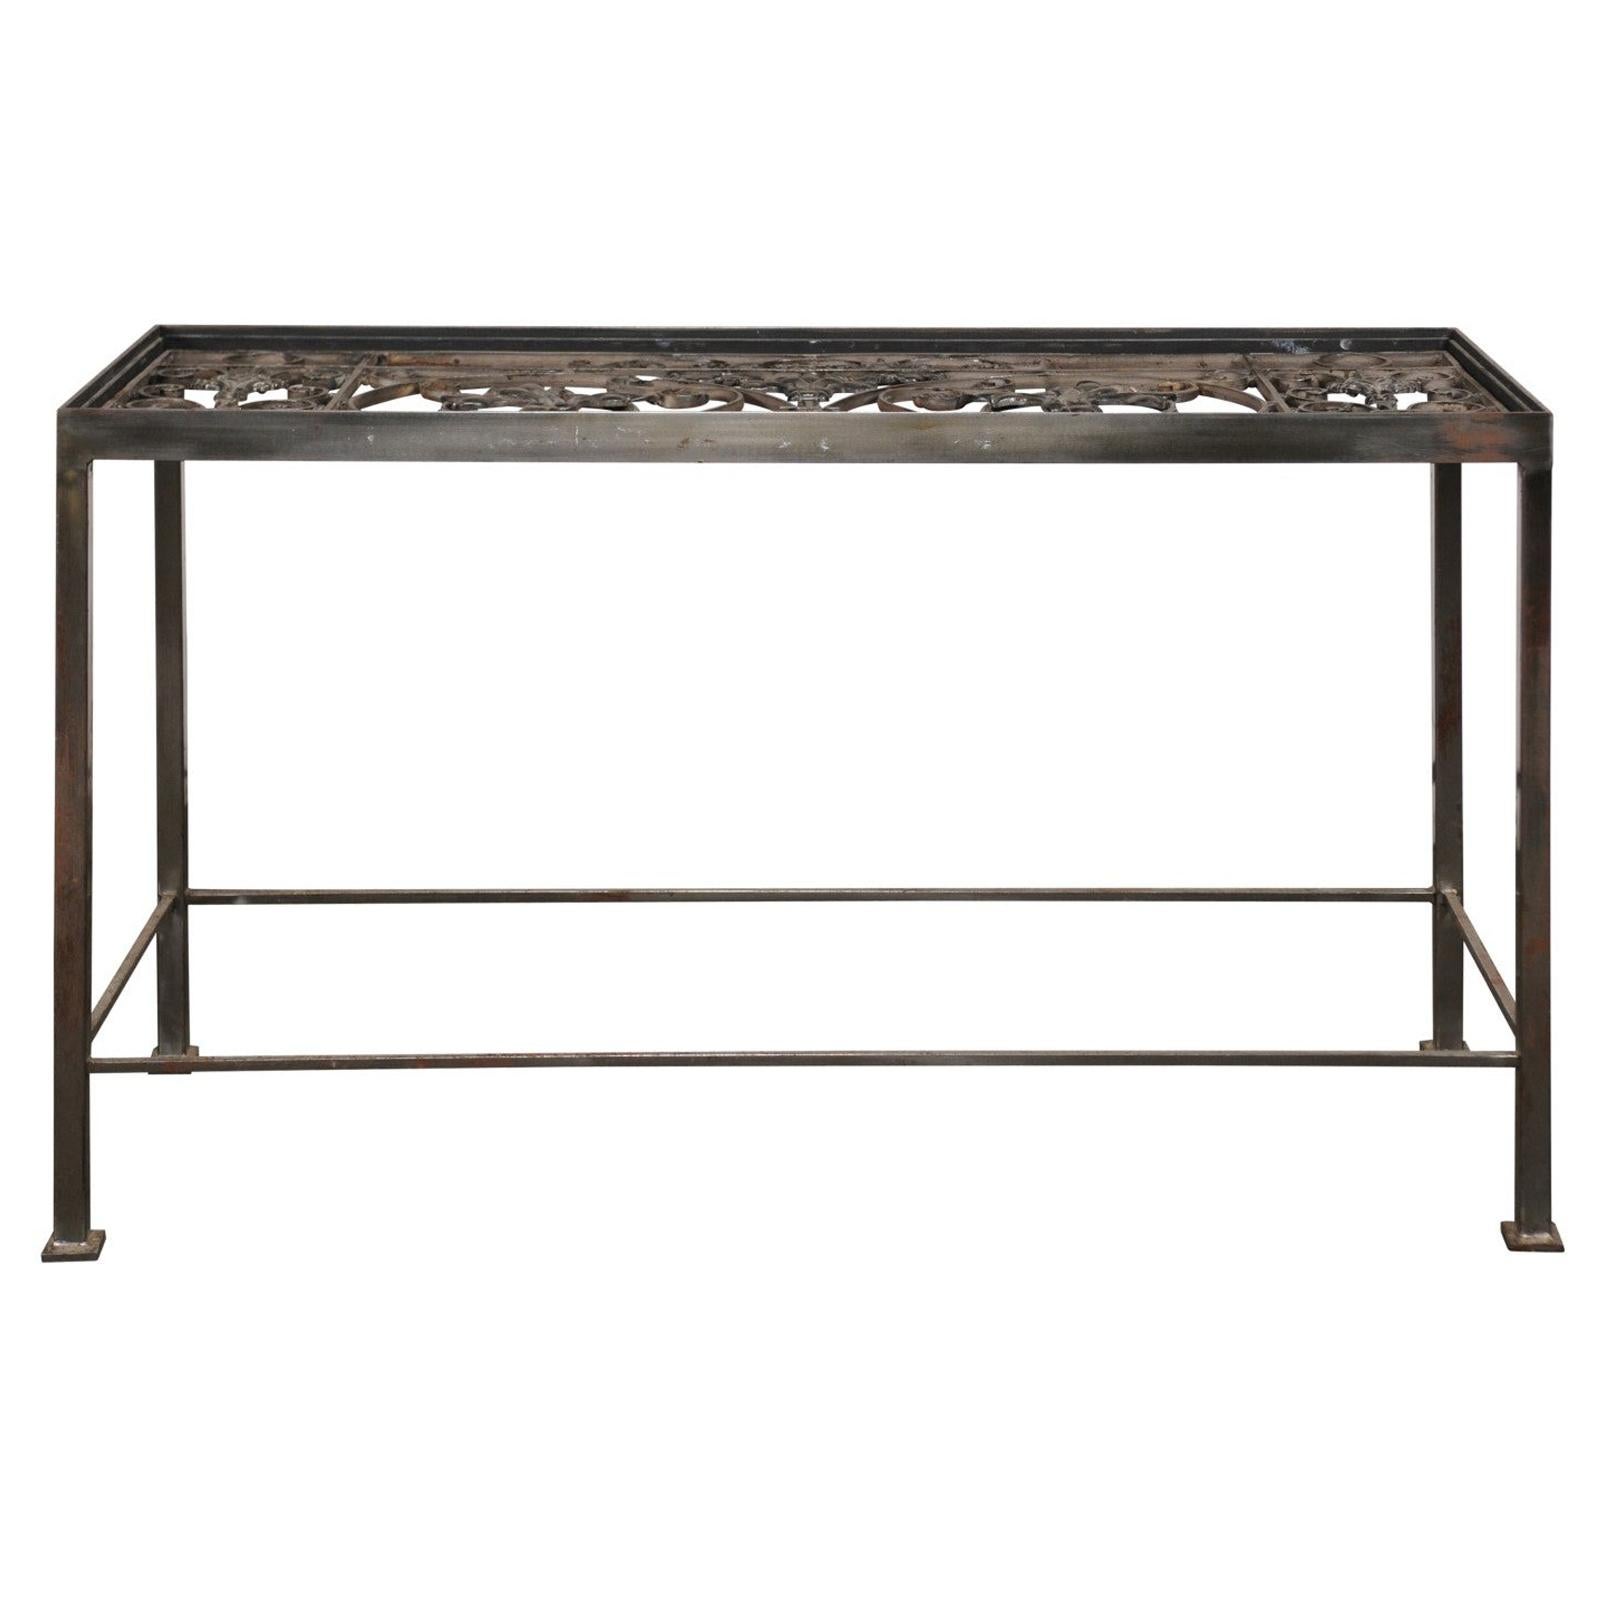 20th Century Iron Console Table with Iron Grate Insert For Sale